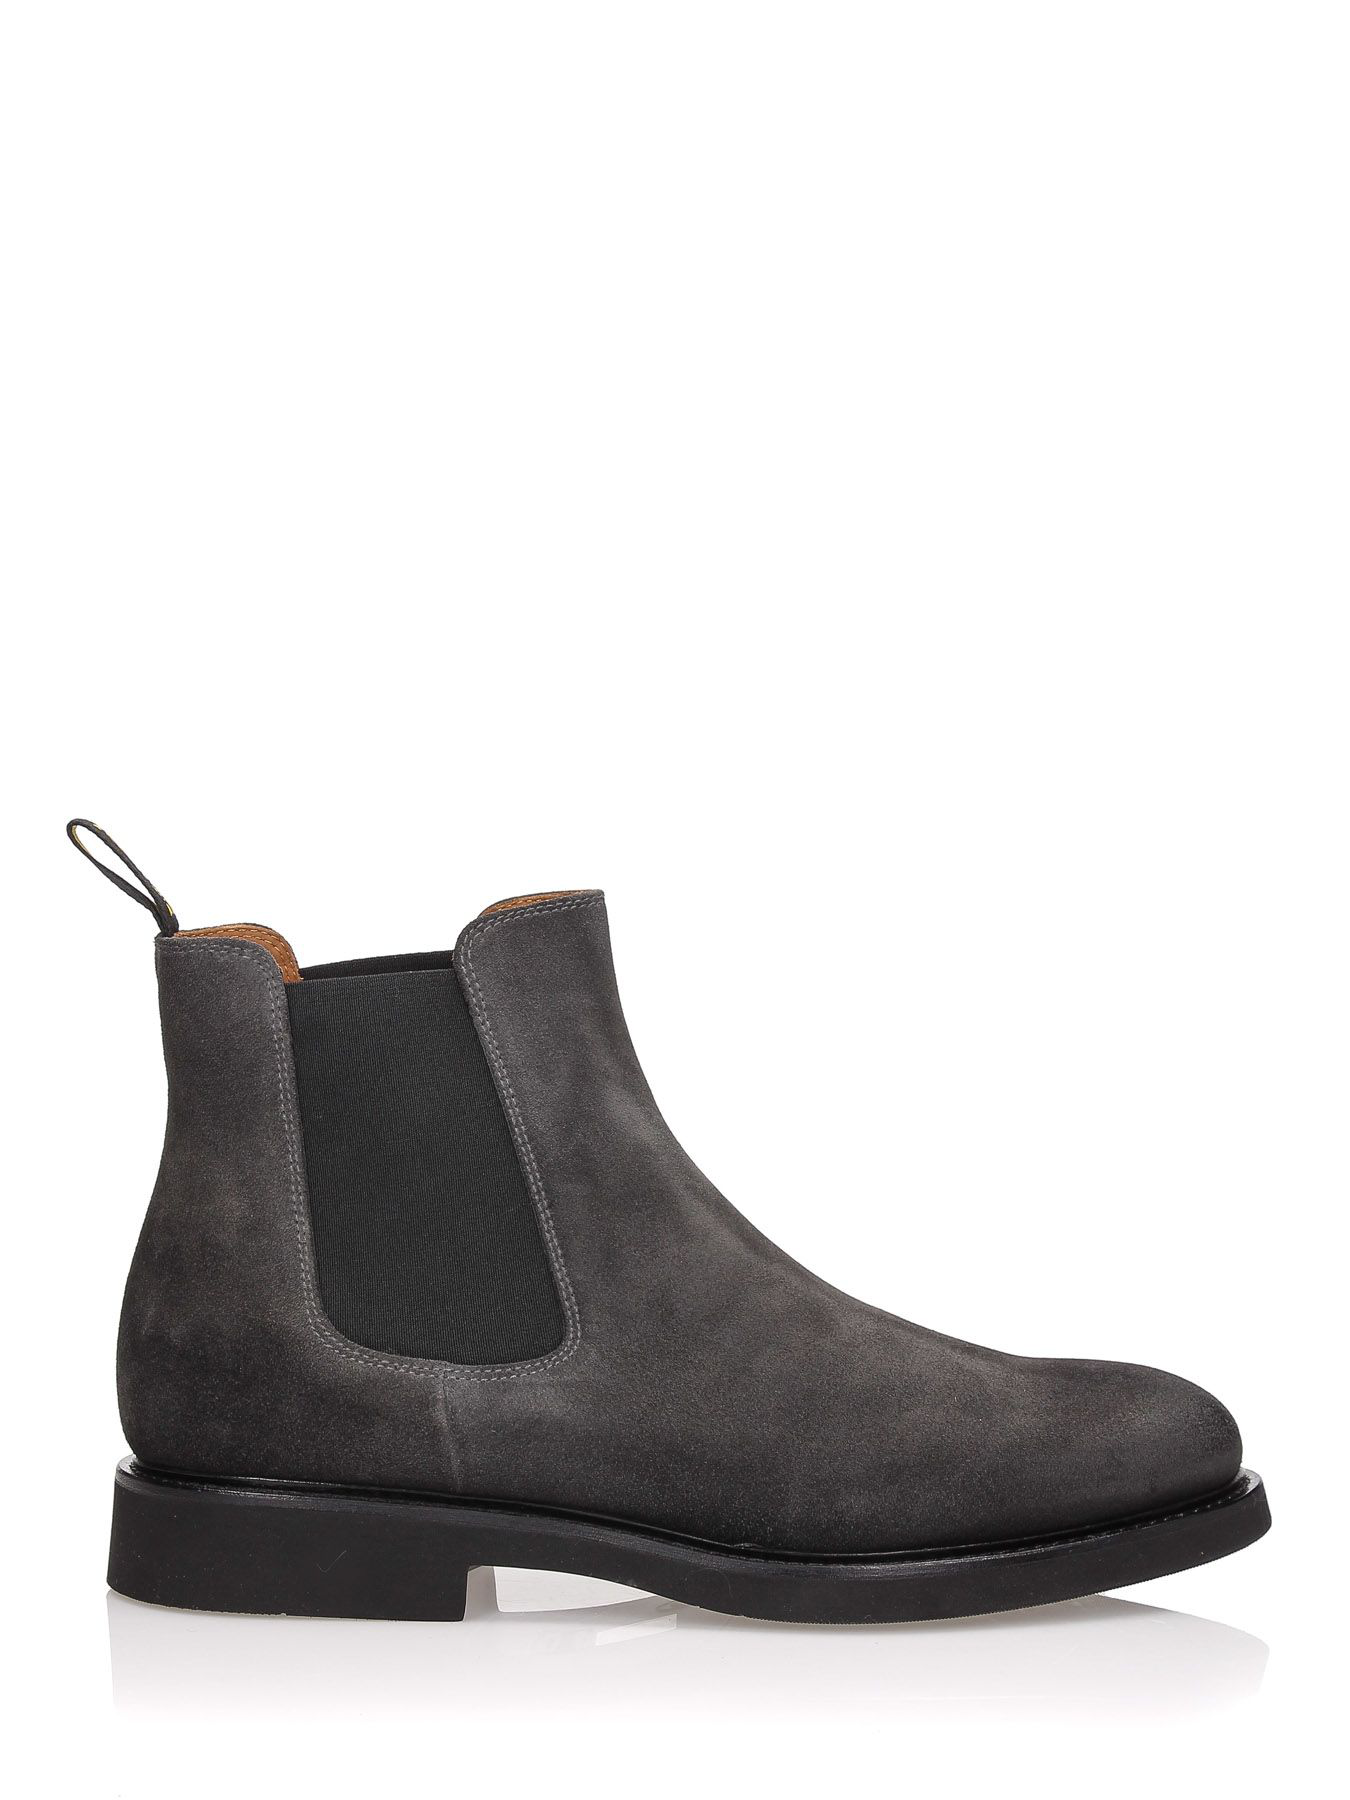 Doucal's Chelsea Boots In Grey | ModeSens